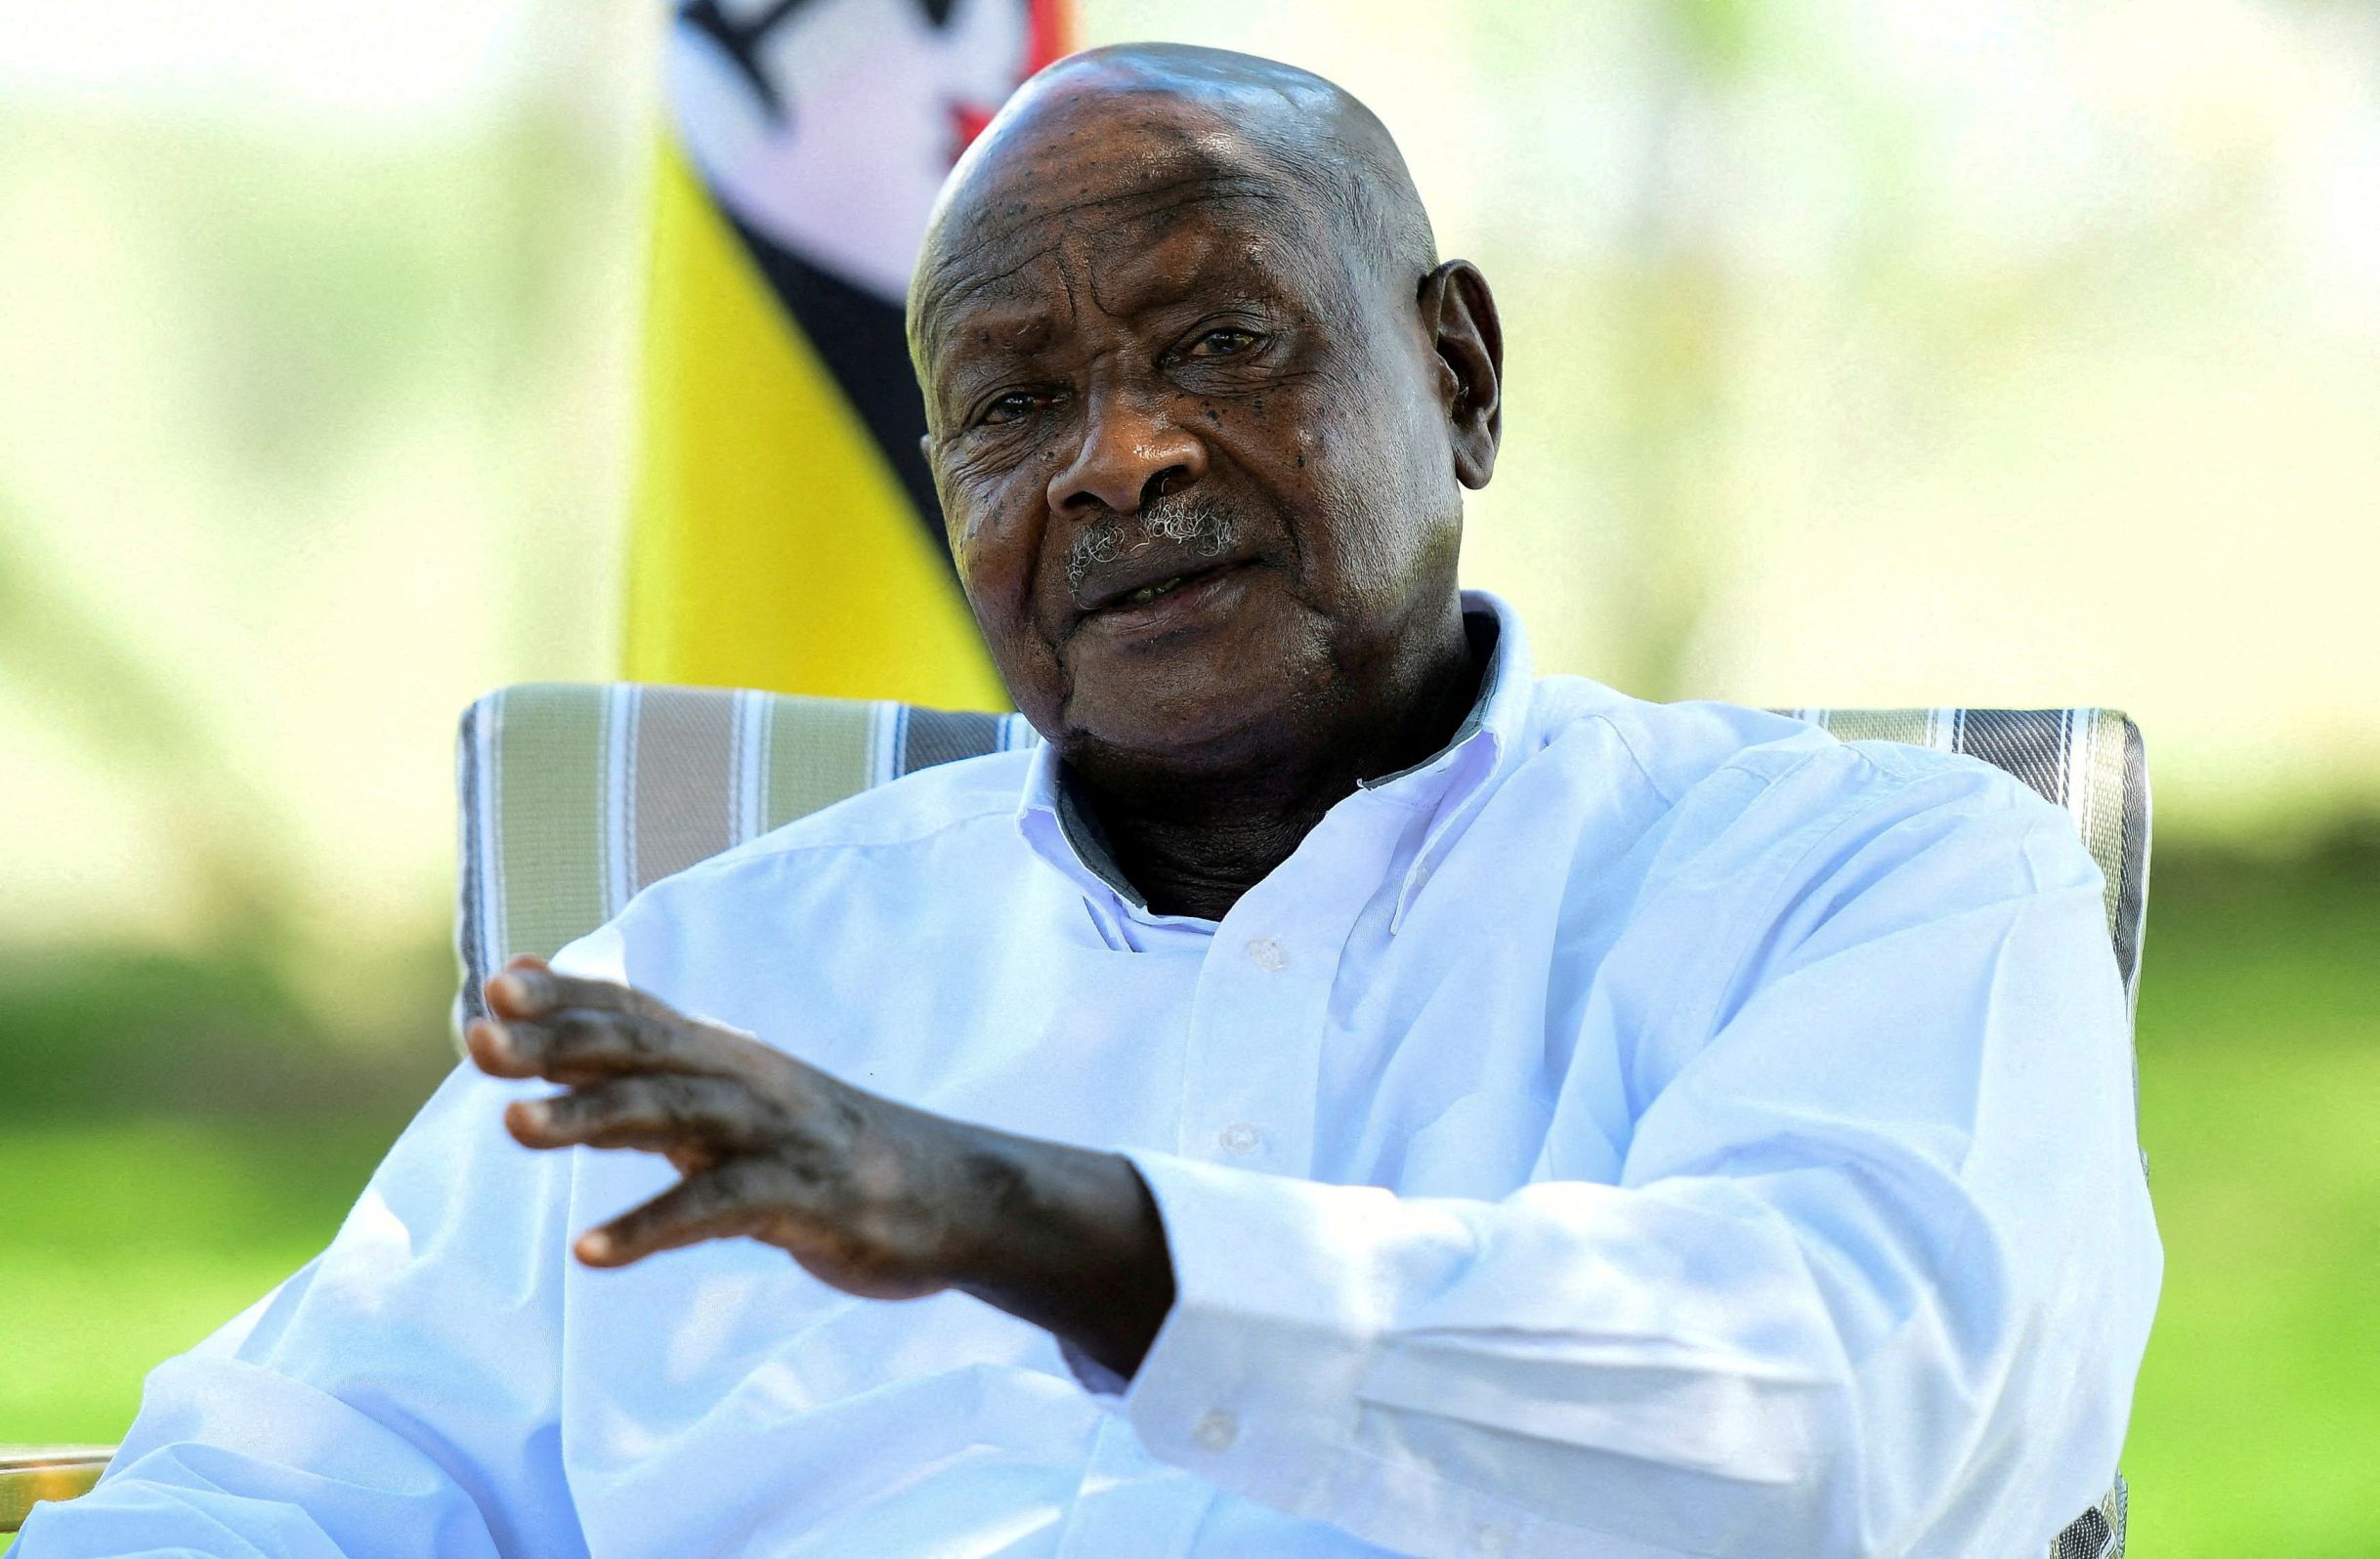 Uganda’s President Yoweri Museveni Appoints Son as Top Military Commander, Fueling Speculation of Succession Plan